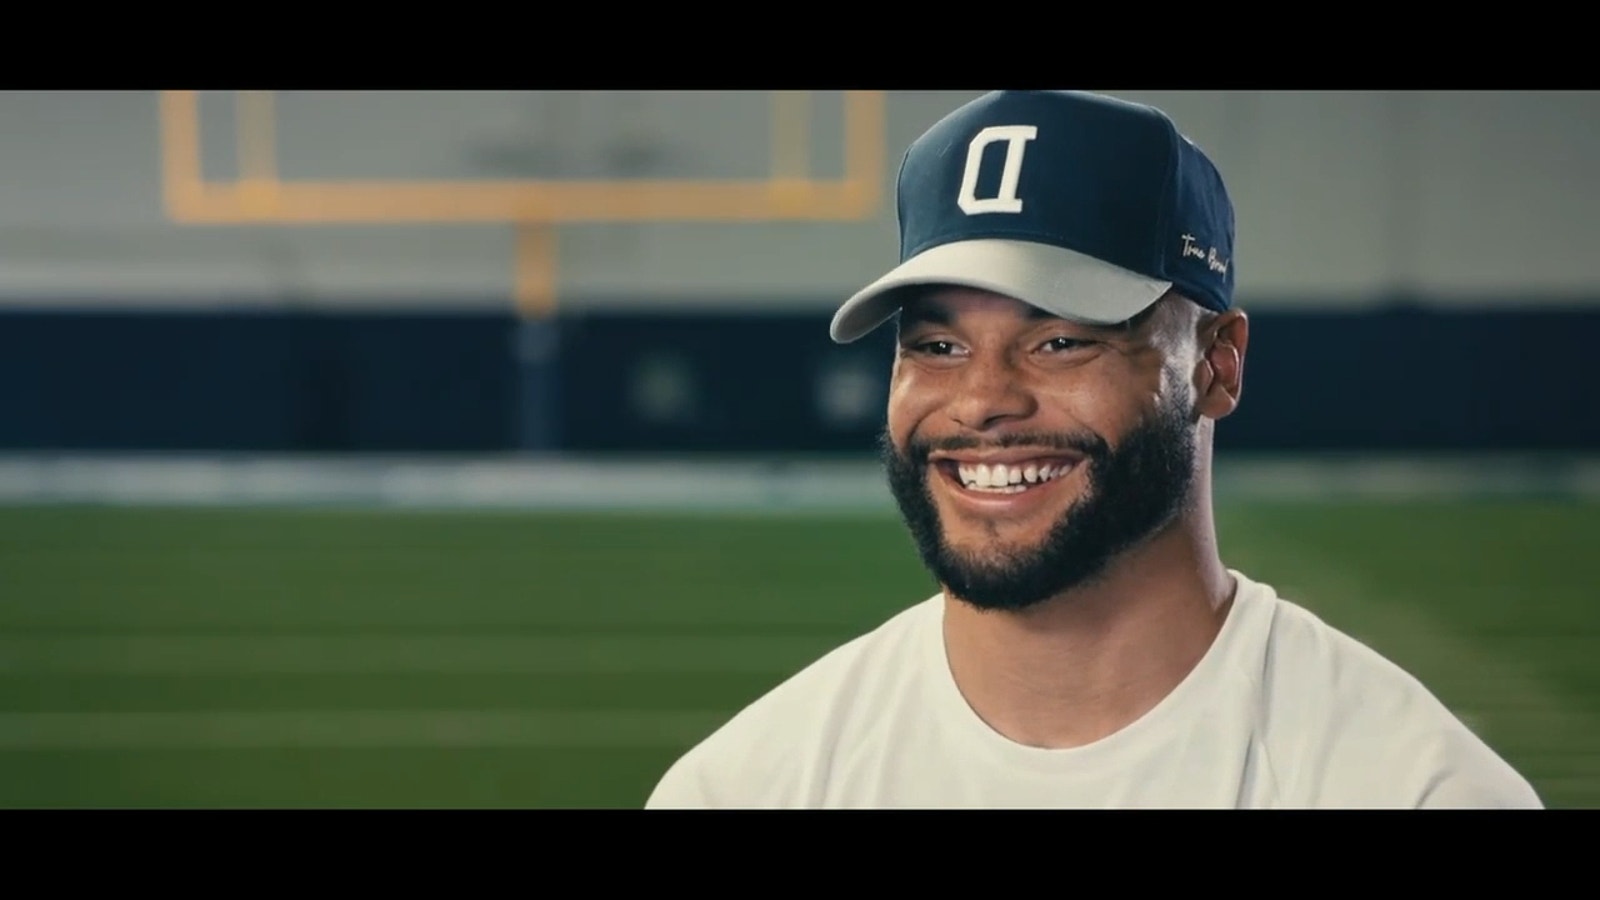 Dak Prescott discusses his road to recovery, leading the Dallas Cowboys and more